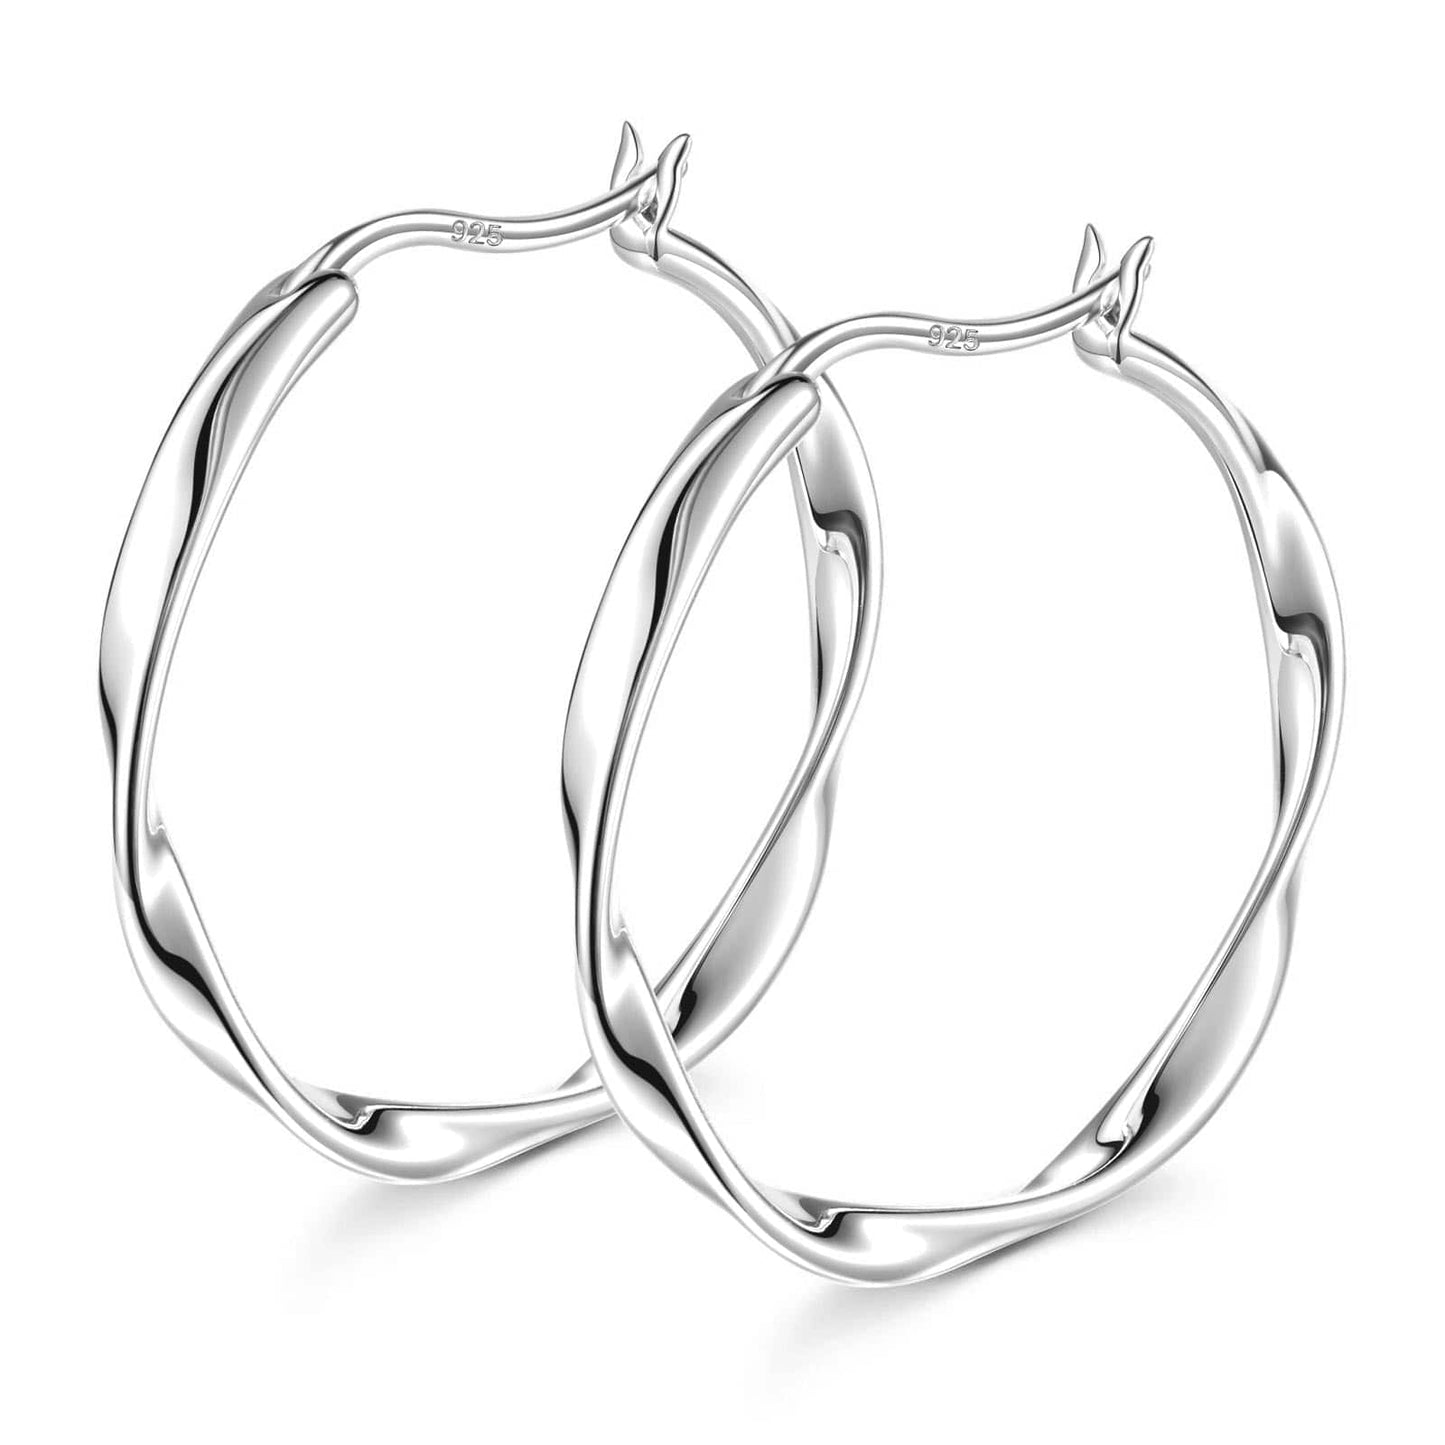 Tarnish-resistant Silver L Size Classic Hoop Earrings with Sterling Silver Ear Post In White Gold Plated